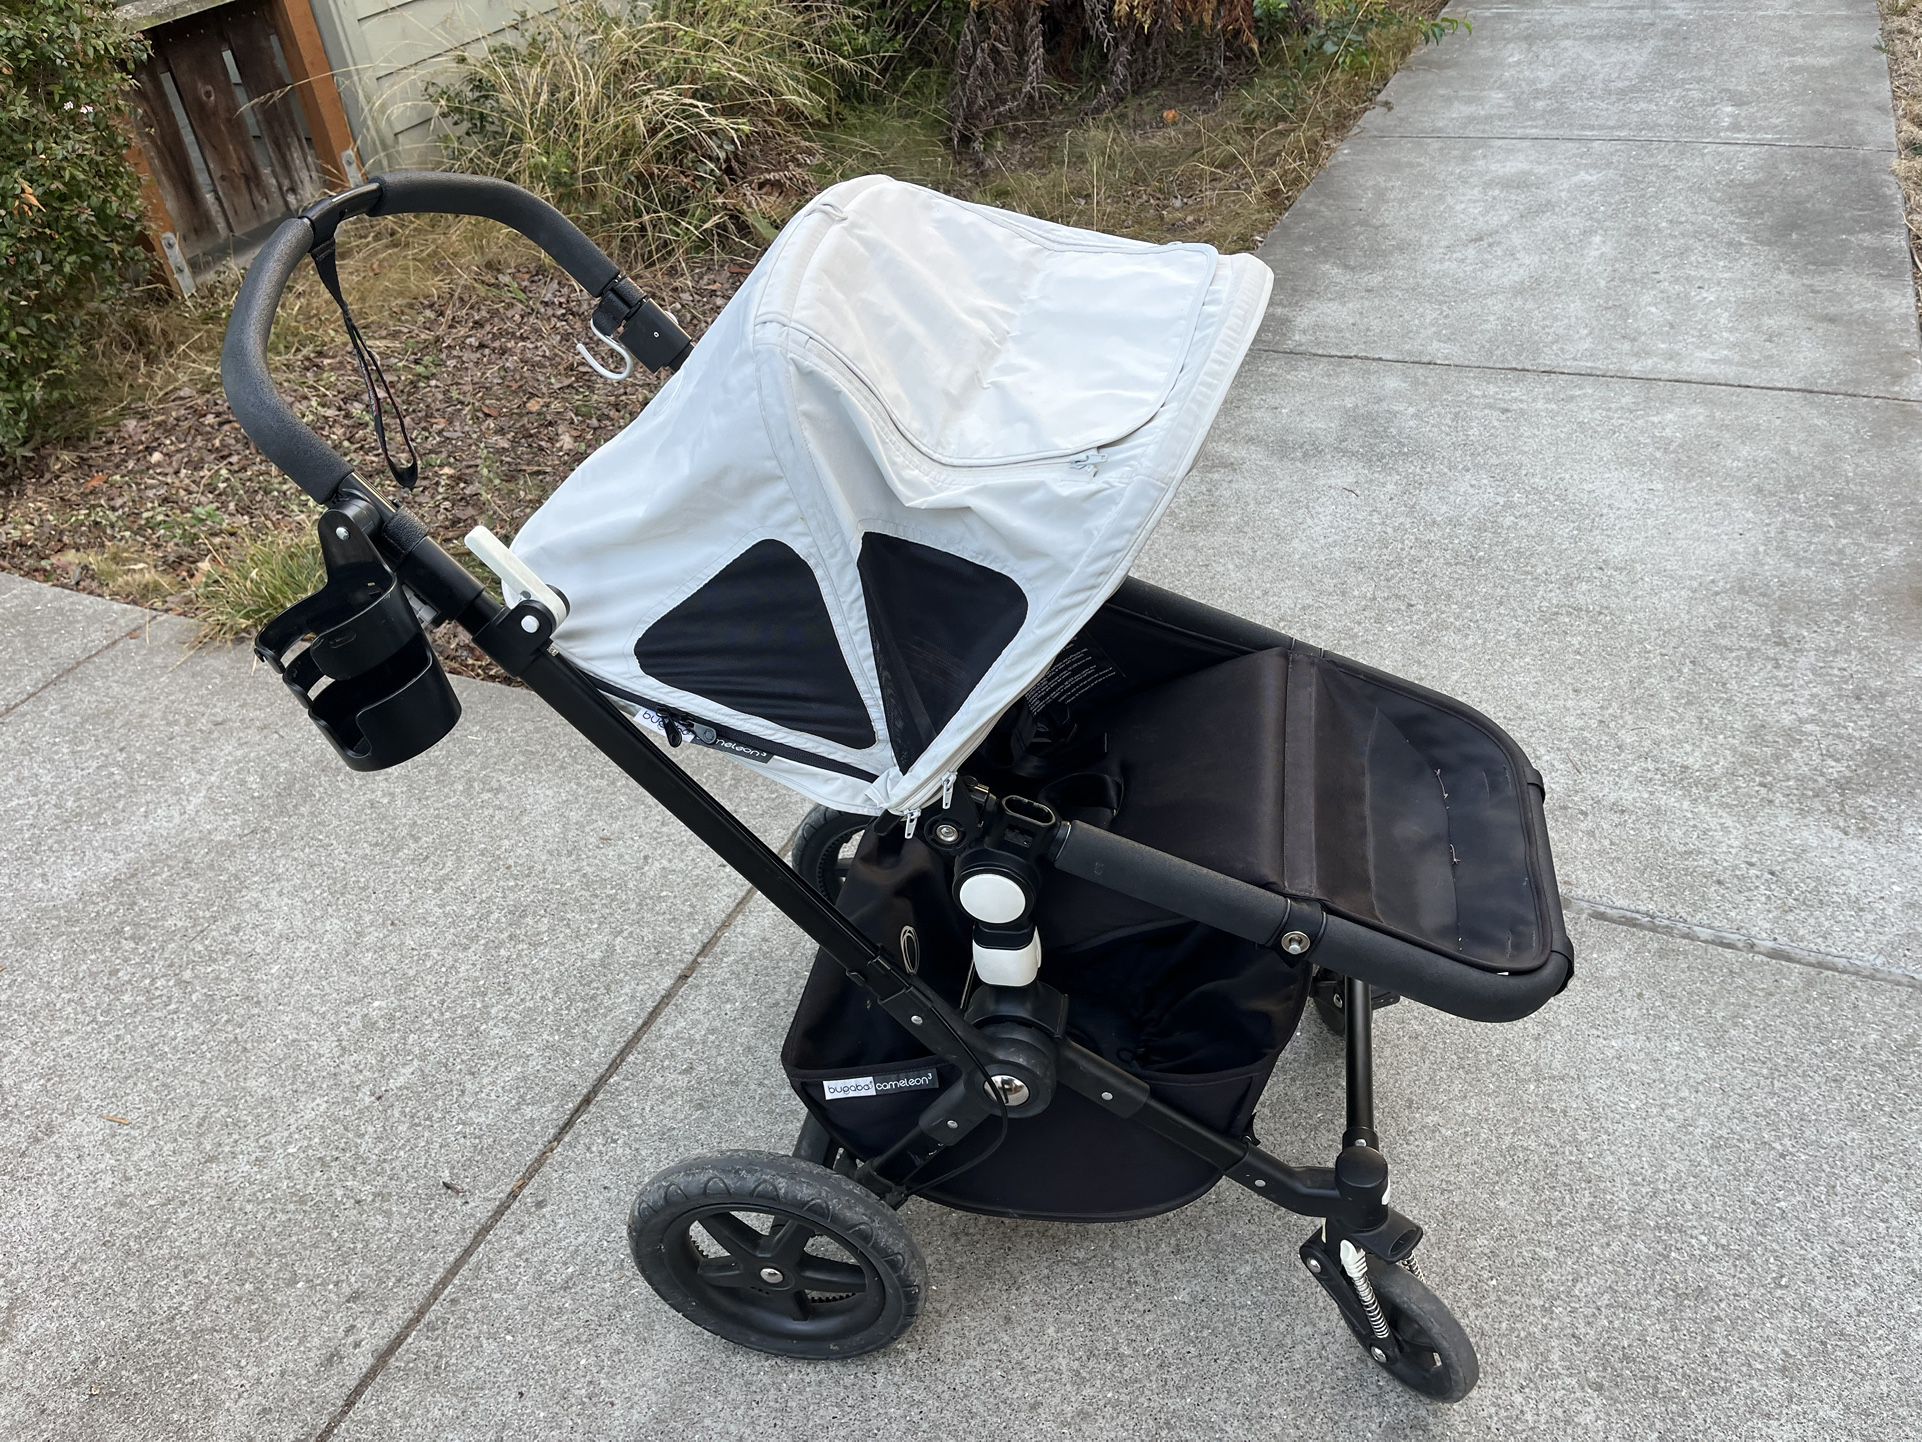 Bugaboo Chameleon Stroller With Bassinet & Accessories 